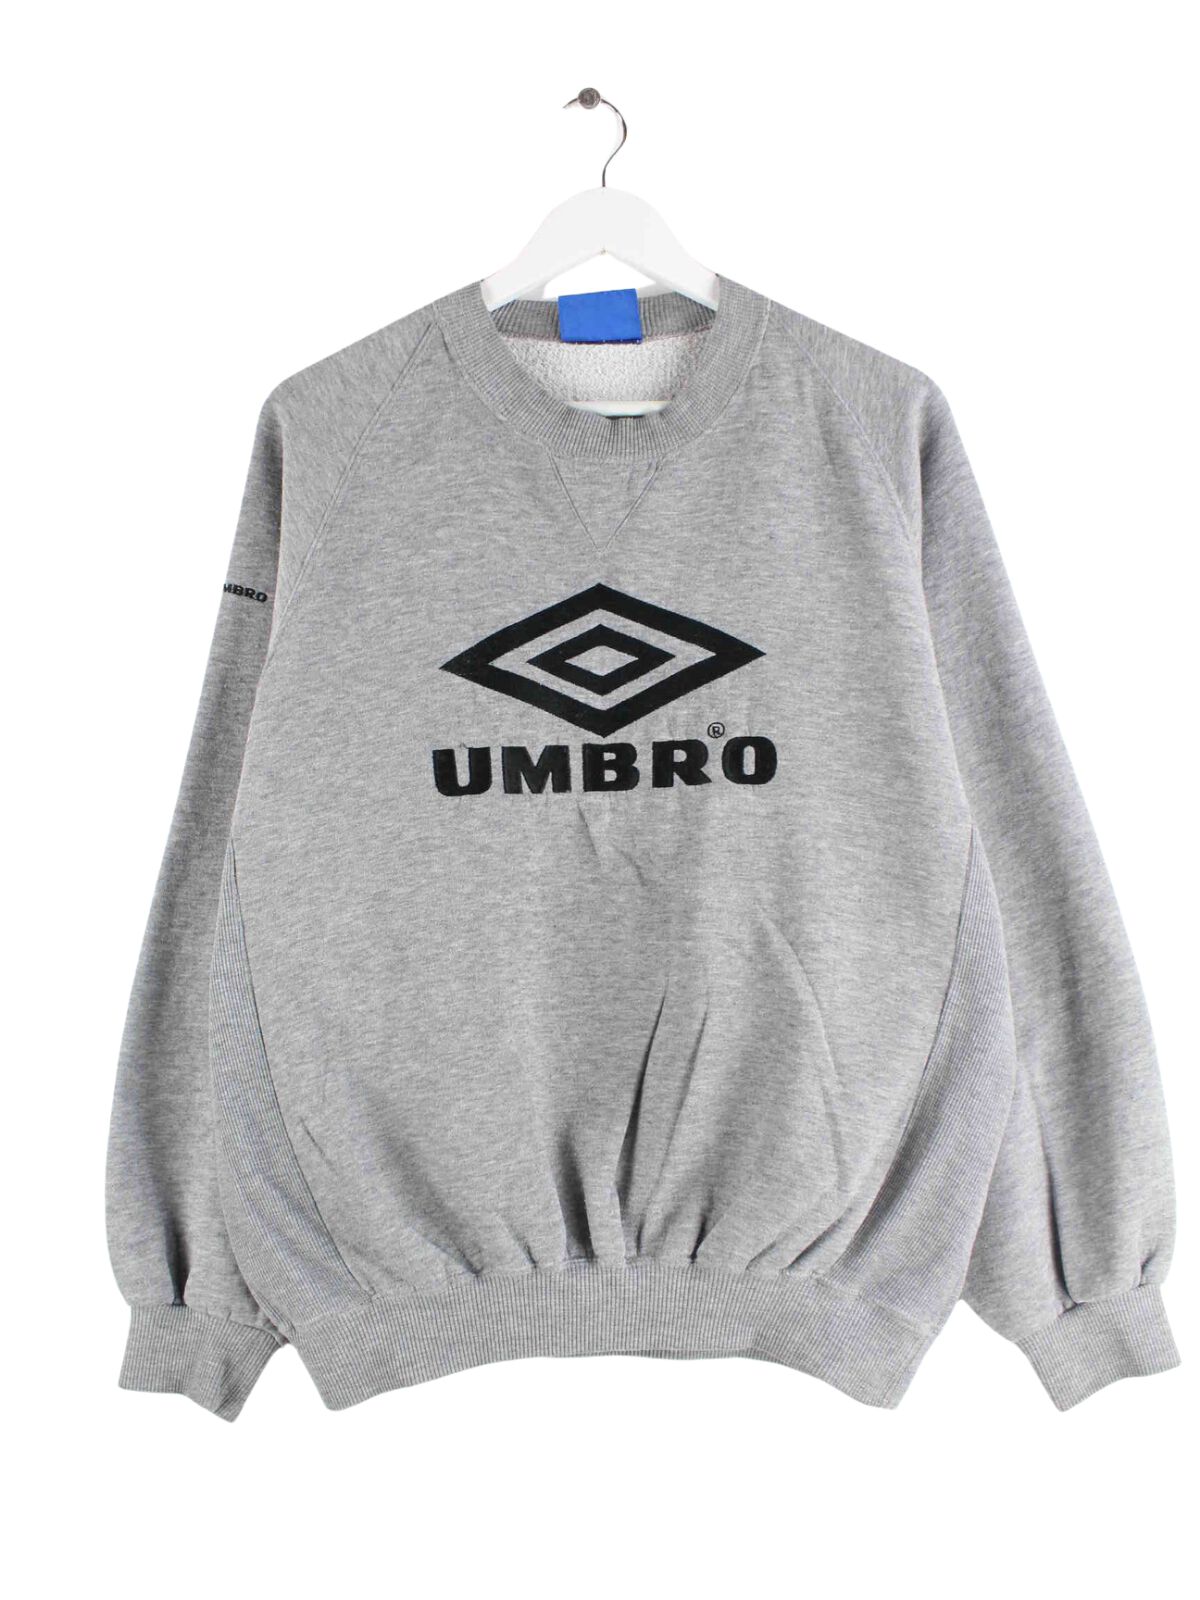 Umbro 90s Vintage Embroidered Sweater Grau L (front image)